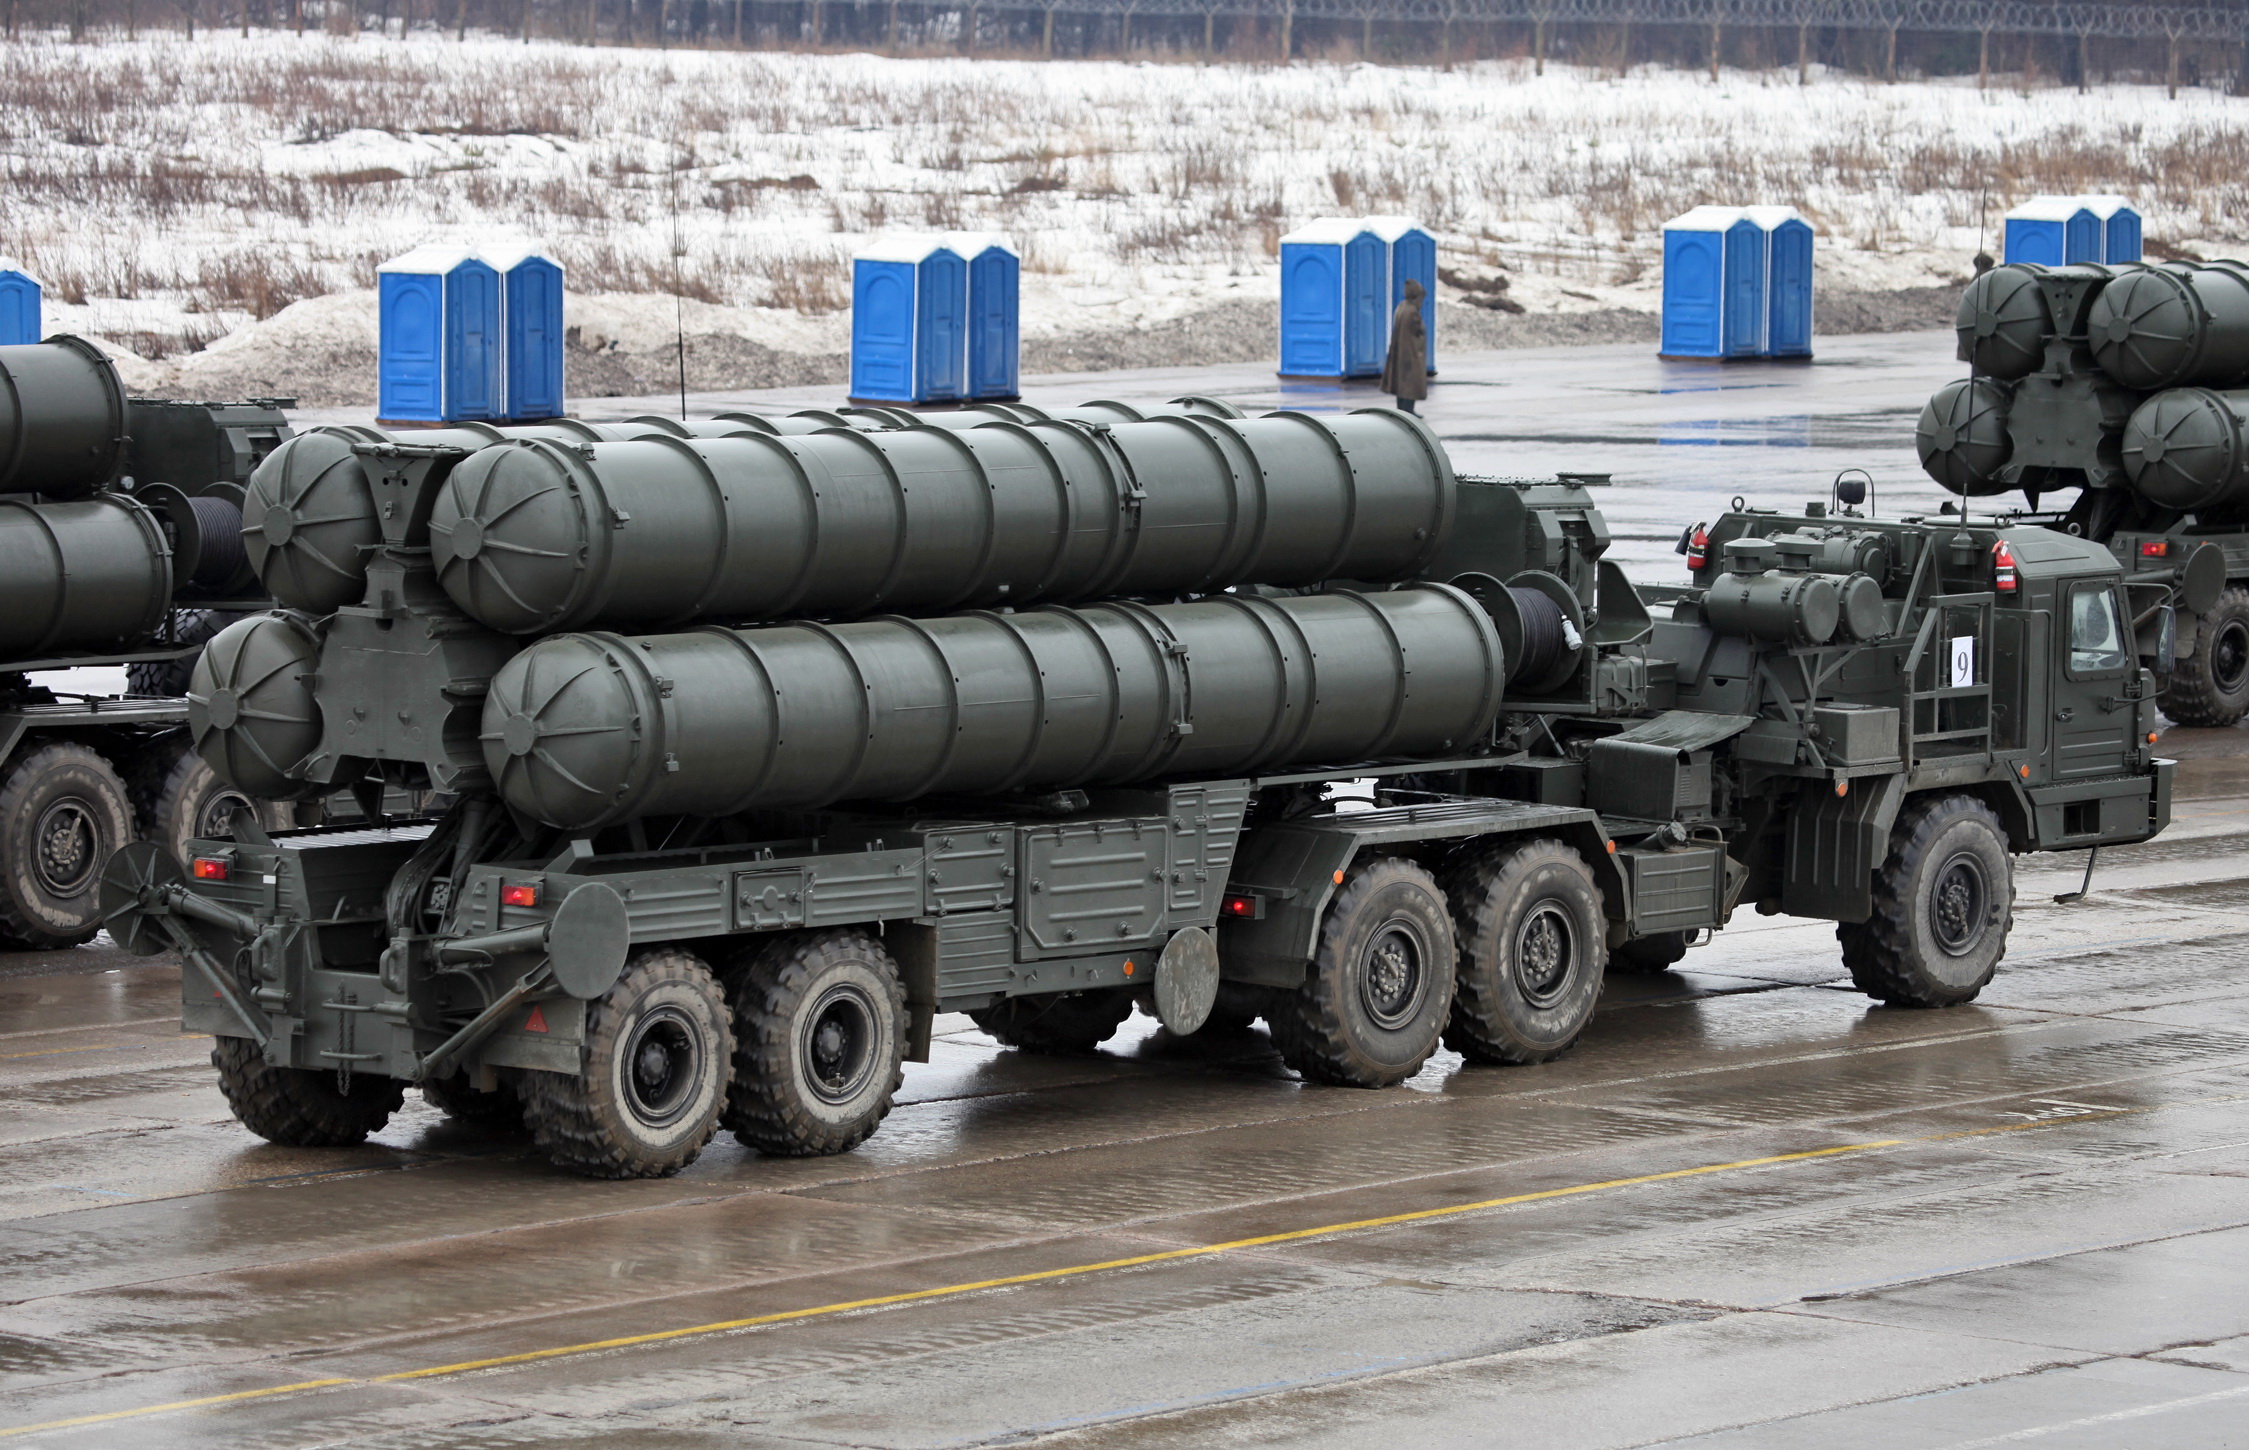 Turkey's S-400s to be loaded on planes Sunday in Russia -Haberturk